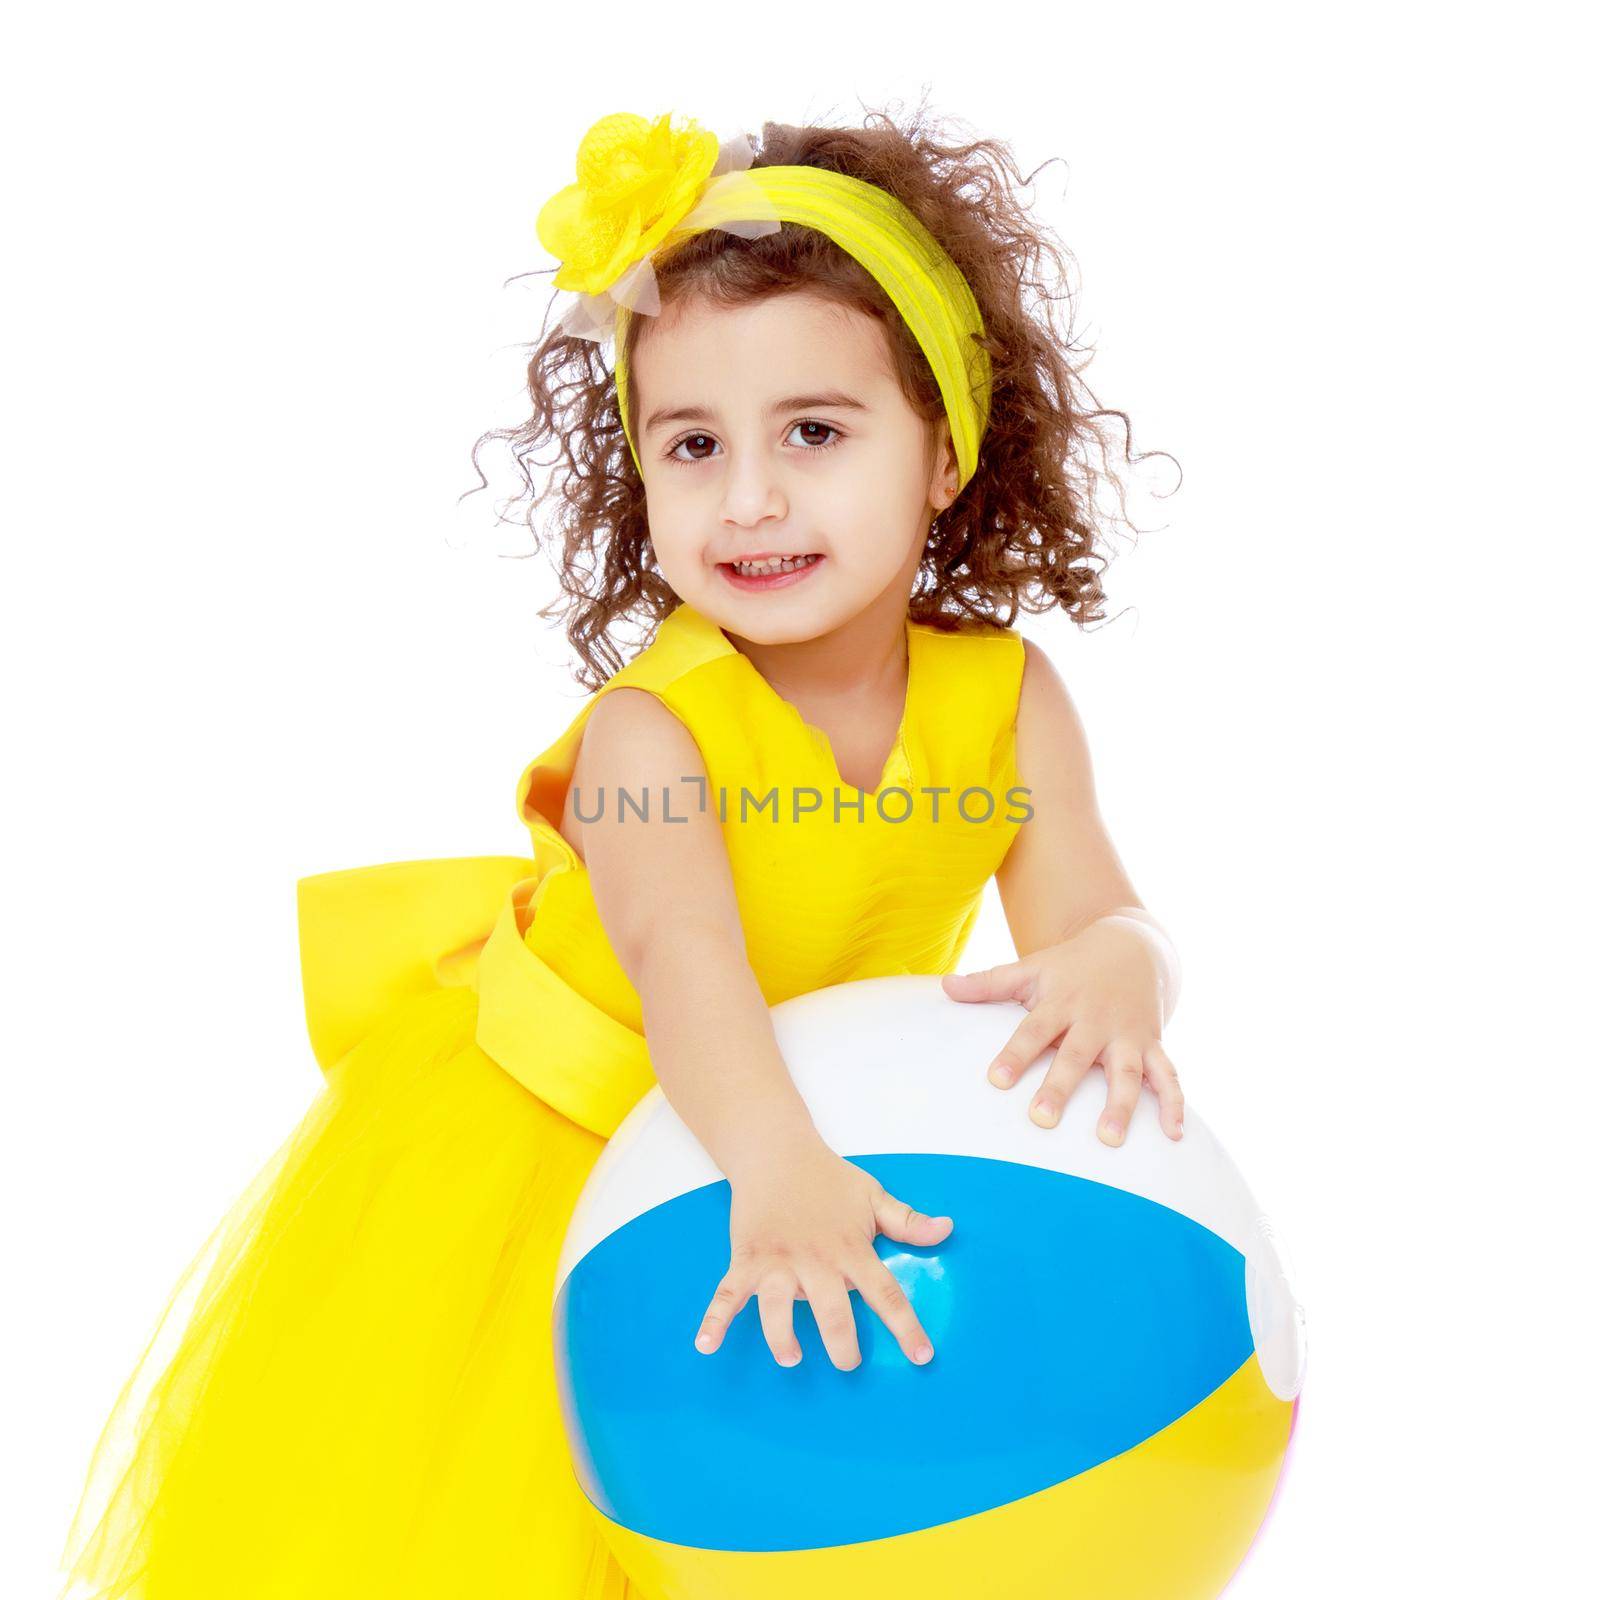 Funny curly baby girl in a bright yellow dress and bow on her head playing with a ball.Isolated on white background.